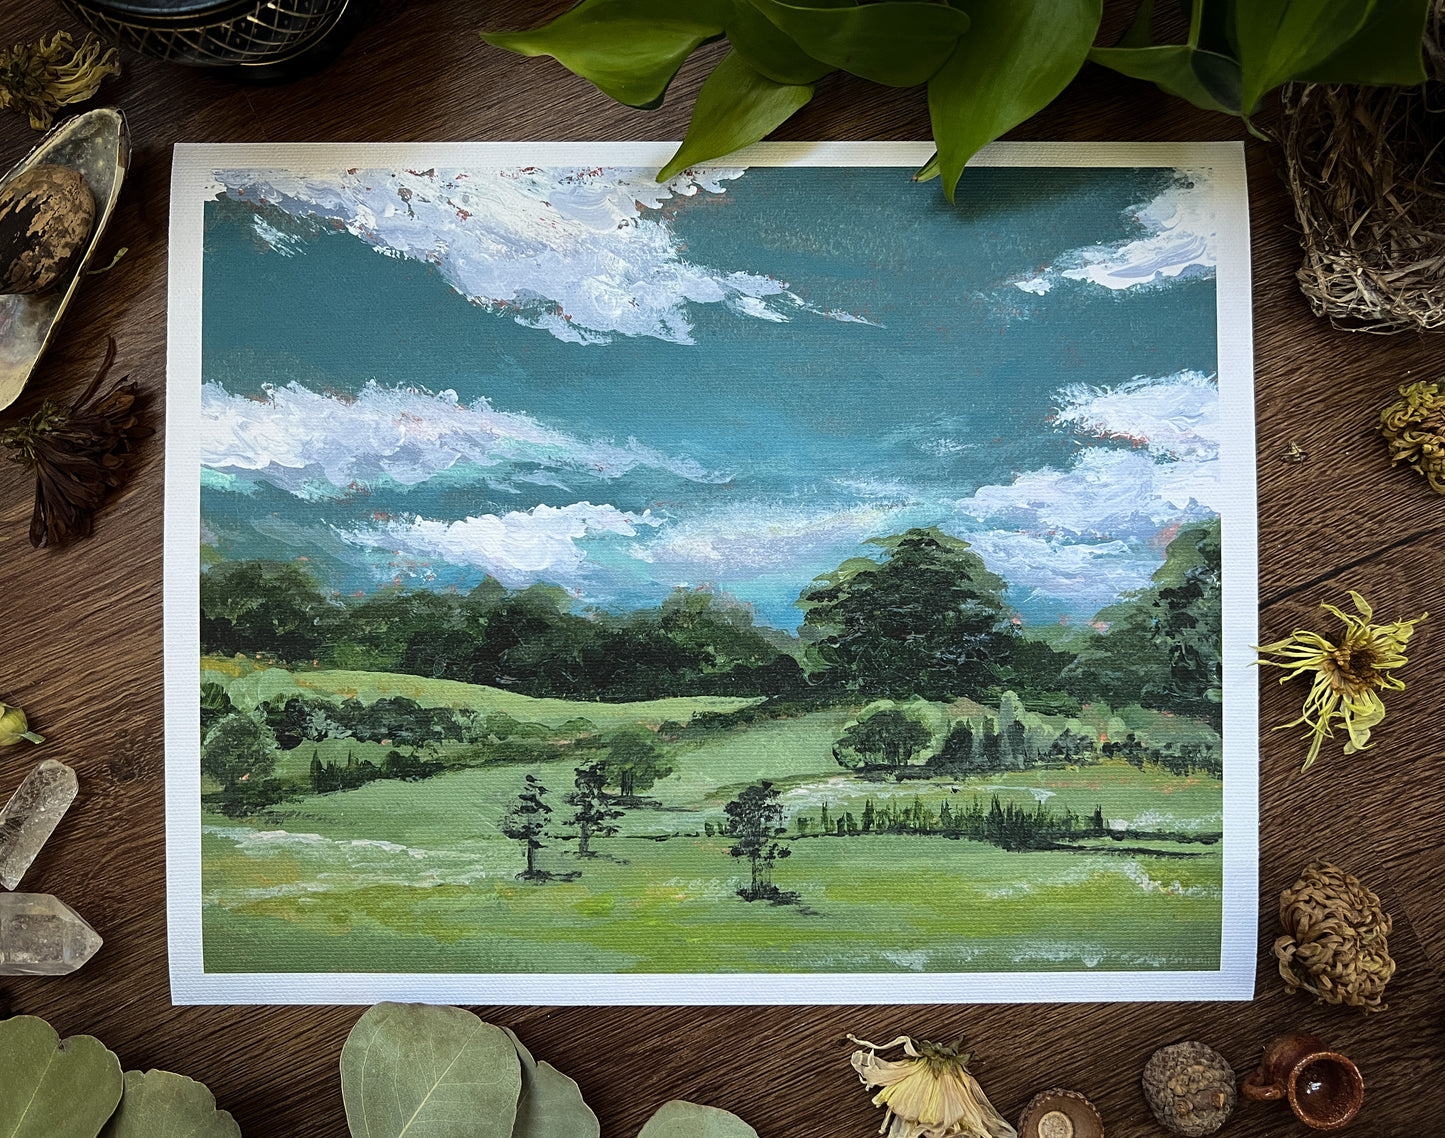 Dreaming of spring no. i - a horizontal canvas giclée print of the south carolina upstate foothills of the blue ridge mountains in southern appalachia